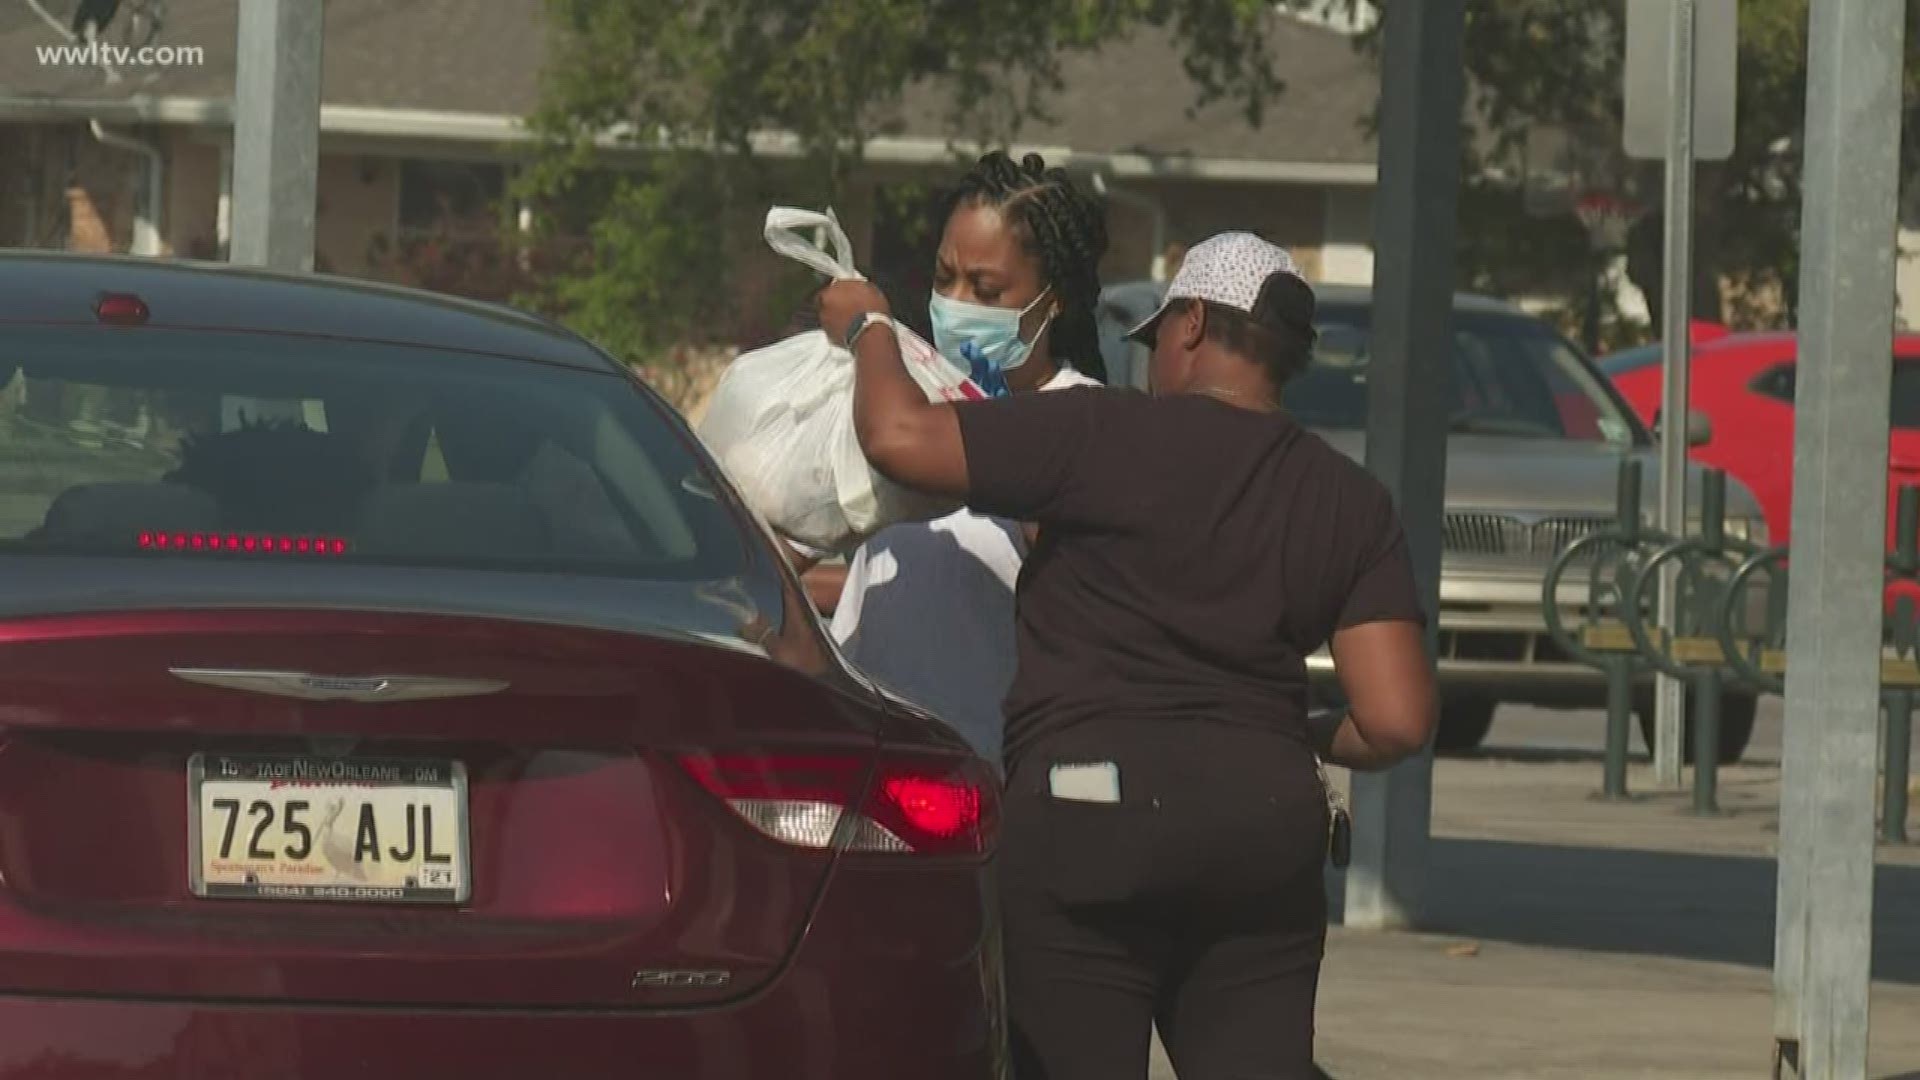 83 Louisianians have died from COVID-19 and more than 2,300 people across the state have been confirmed to be infected, with New Orleans at the epicenter.